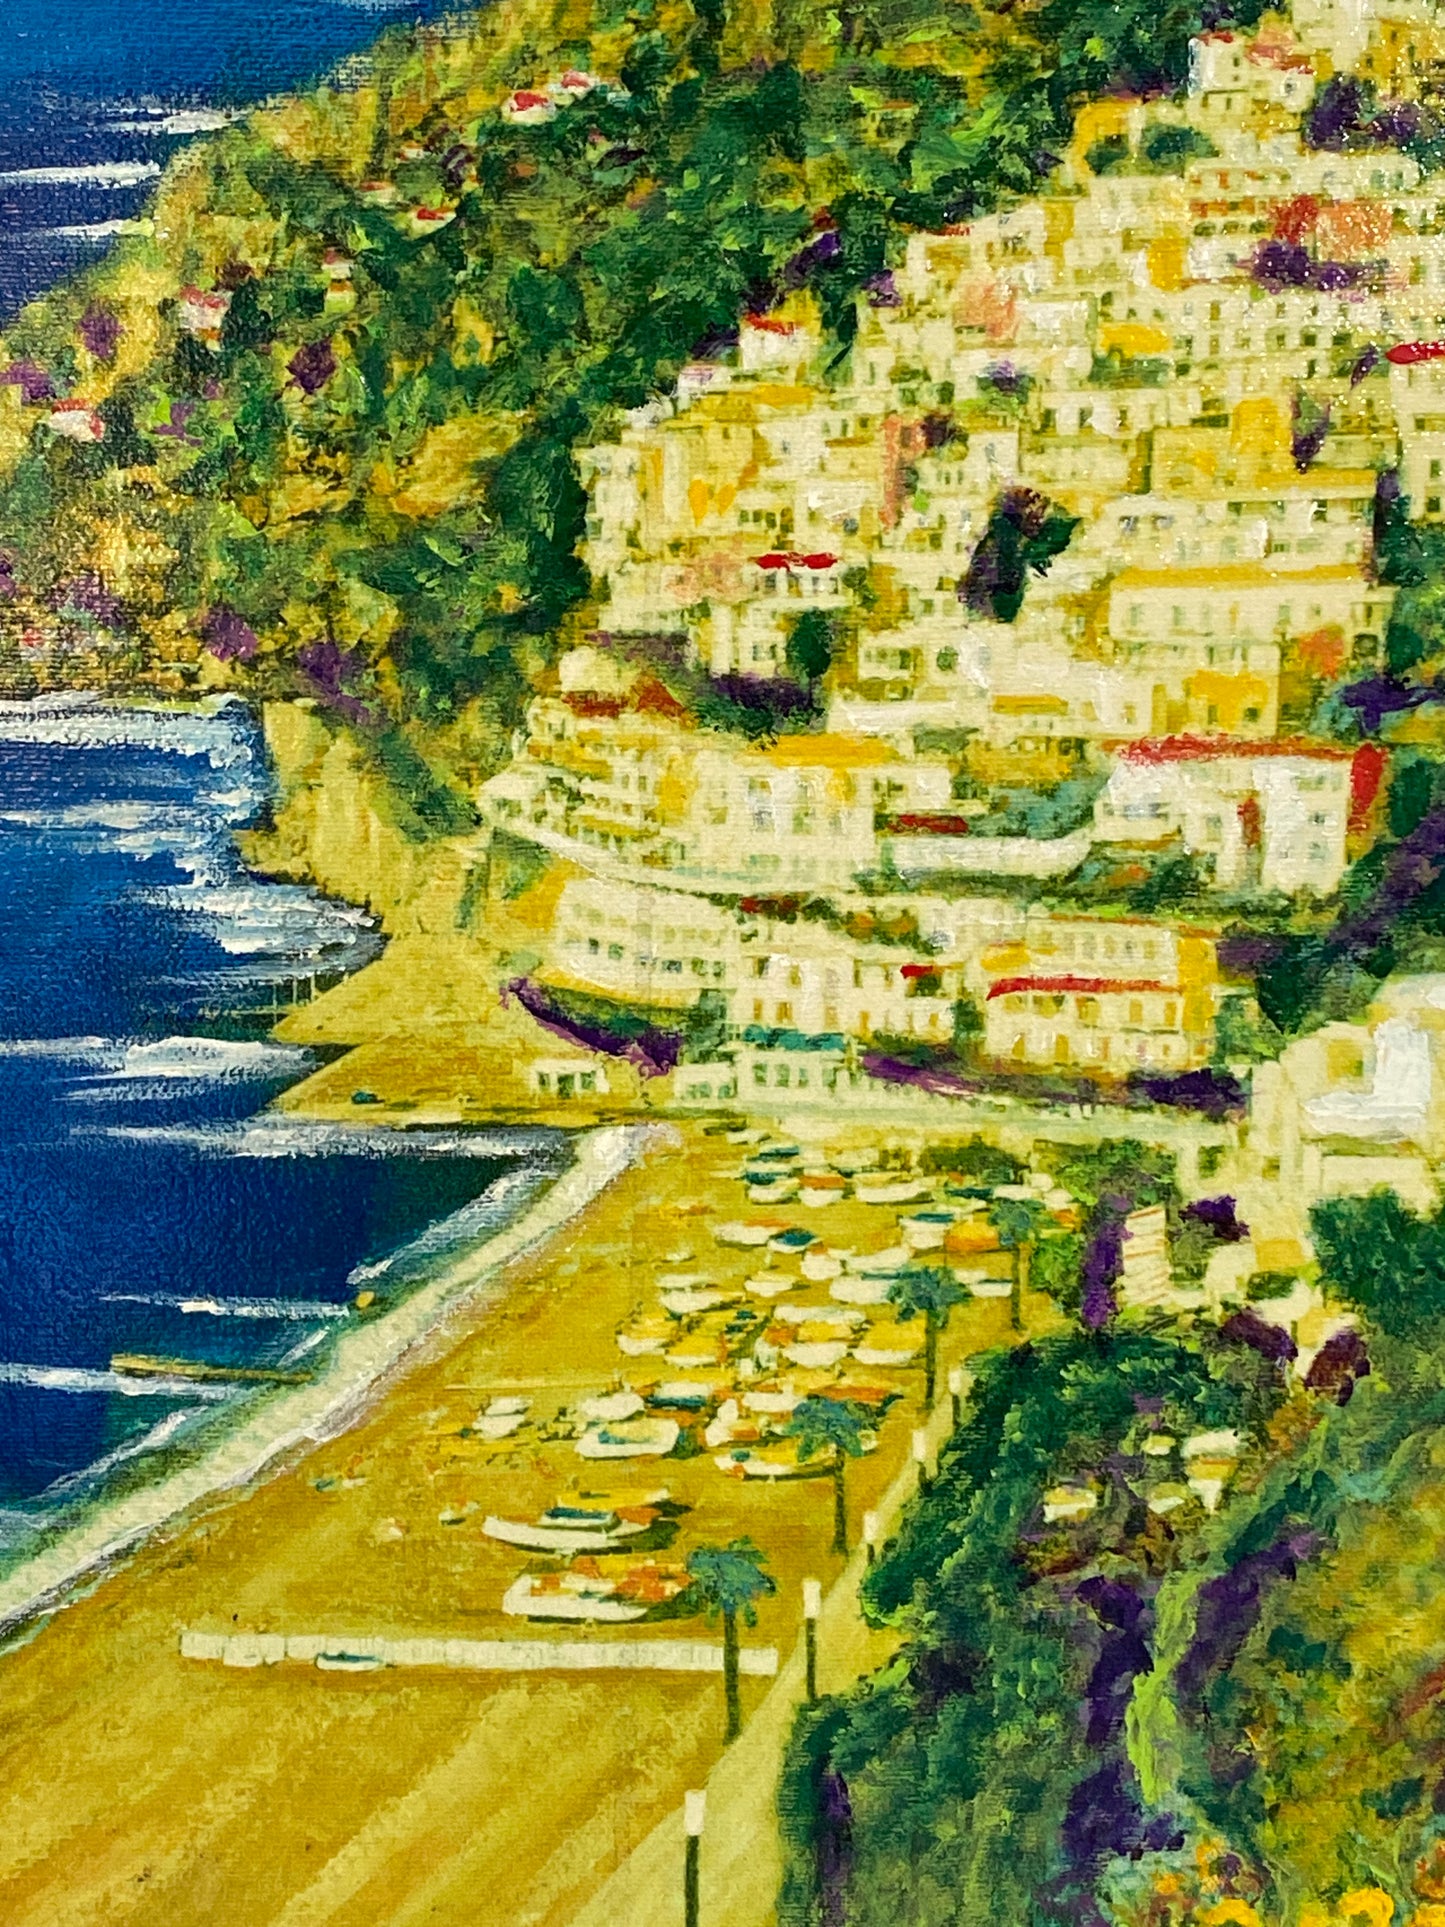 #7050 Costa d'Amalfi Embellished Giclee Painting  16" by 12"